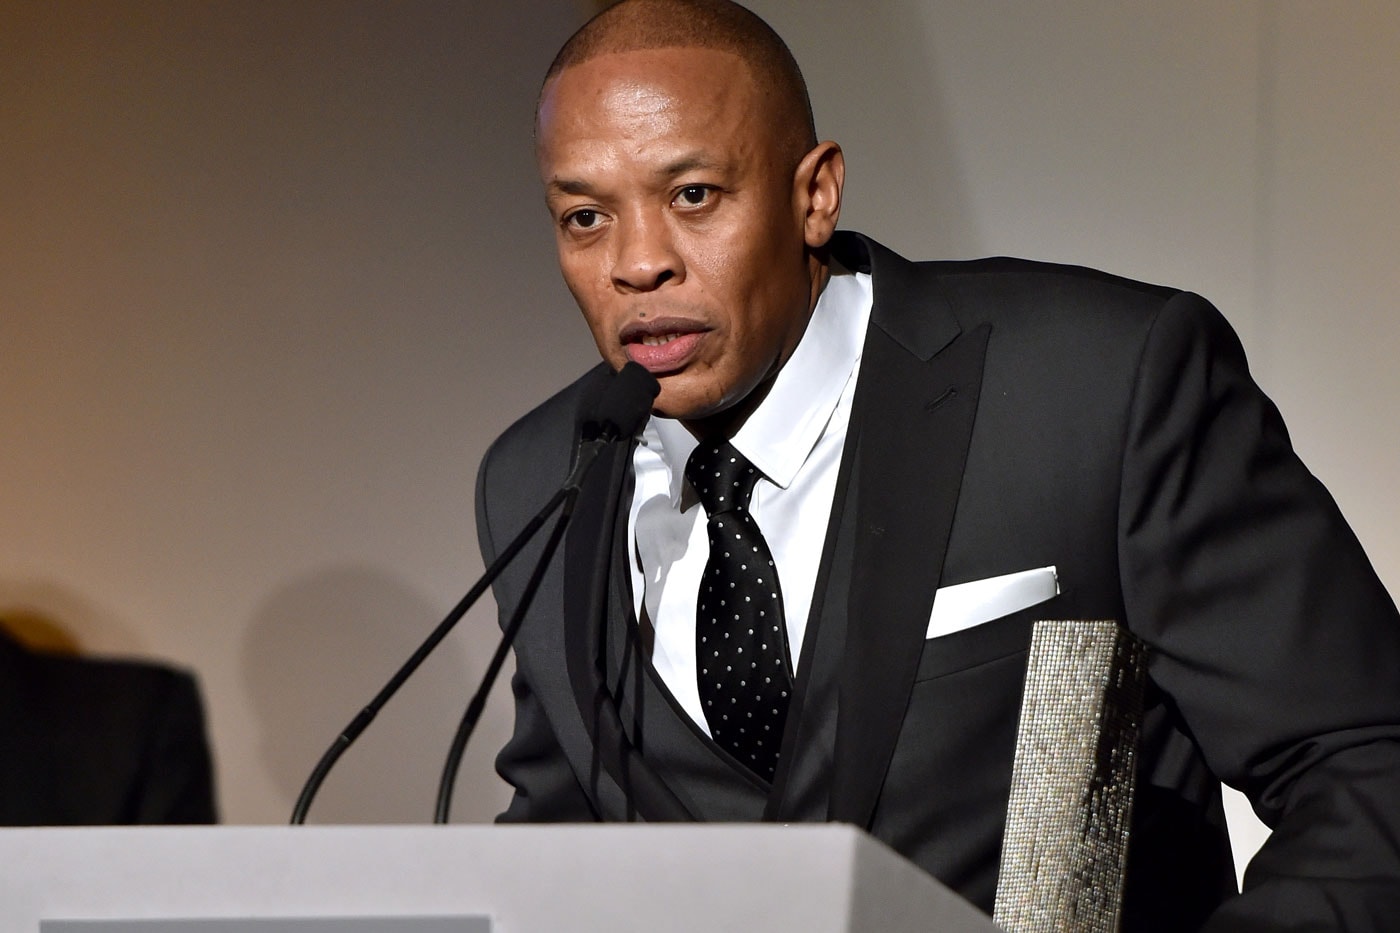 Dr. Dre on Domestic Abuse Accusations: "I Apologize to the Women I’ve Hurt."